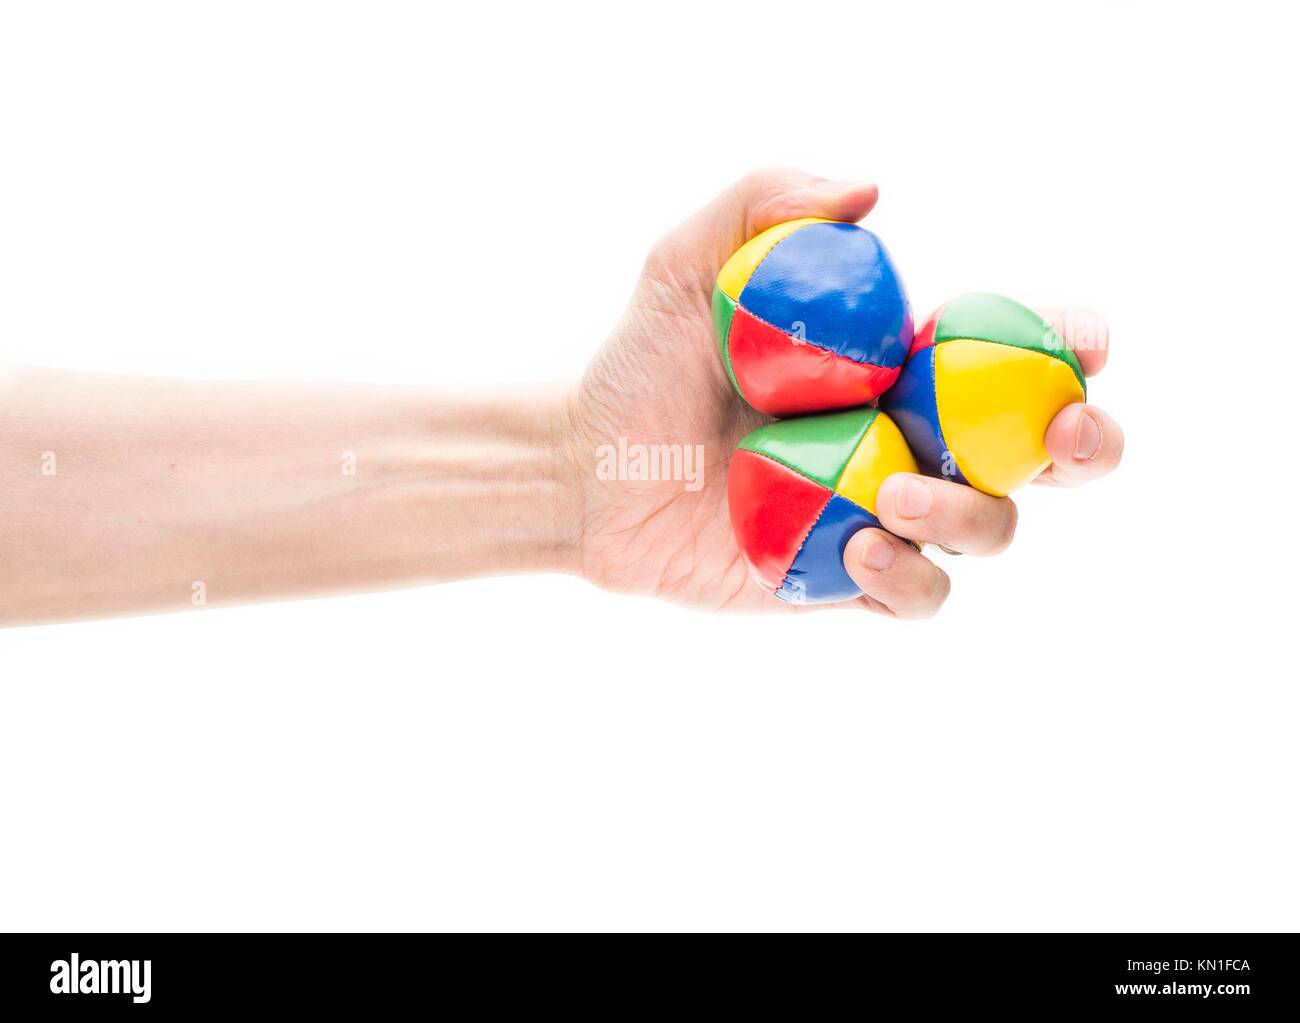 Closeup on white background of male hand holding three colorful juggling balls. Stock Photo